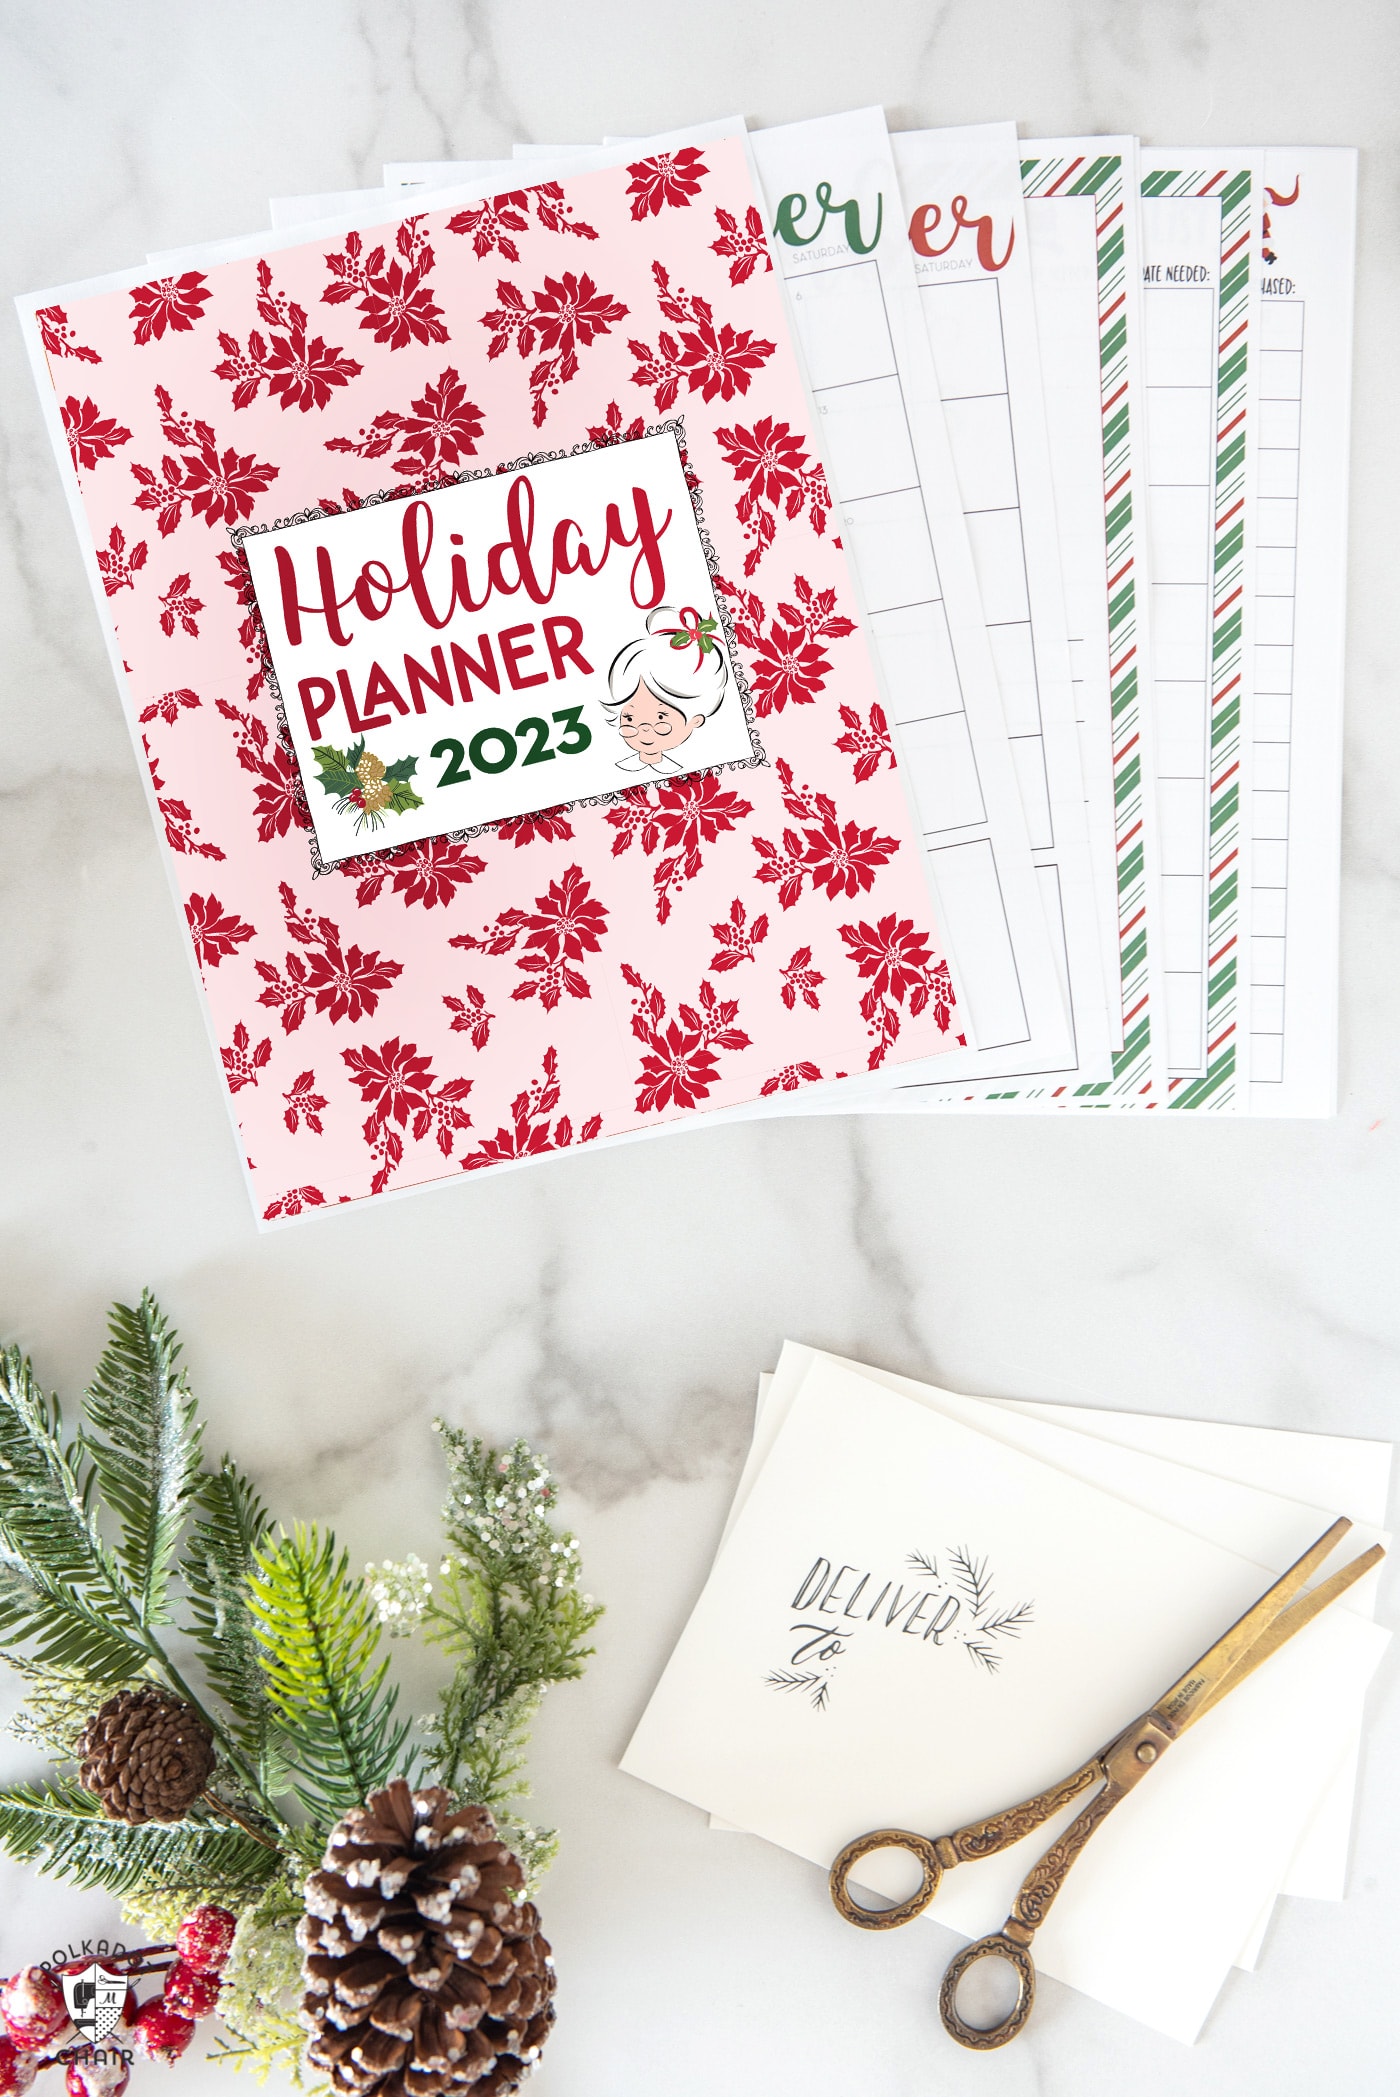 Christmas planning pages on white marble table with pencils